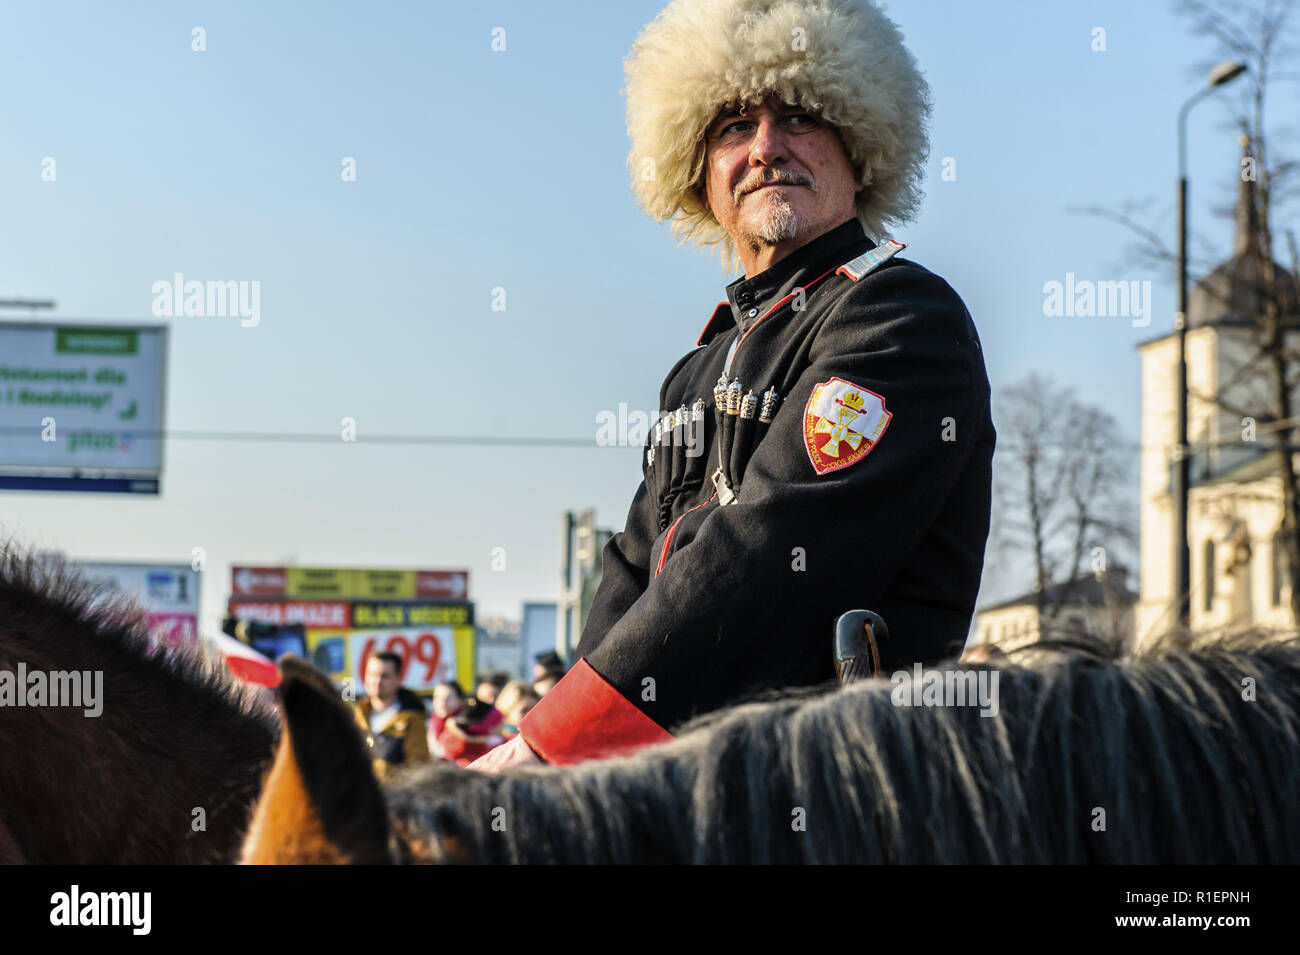 11.11.2018, Lublin: commander of the Cossack troops Stock Photo